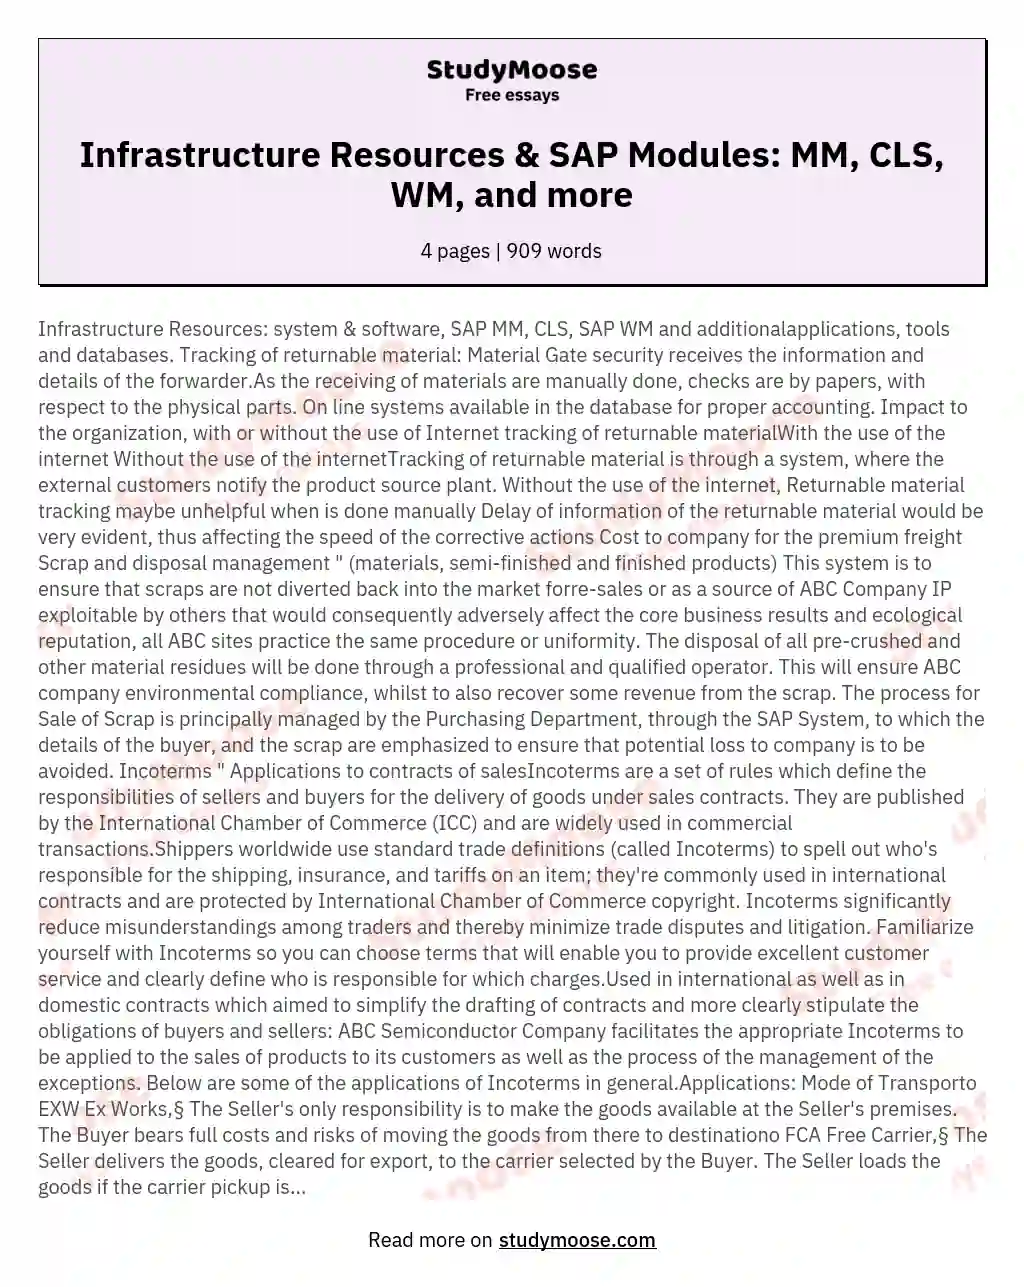 Infrastructure Resources system software SAP MM CLS SAP WM and additionalapplications